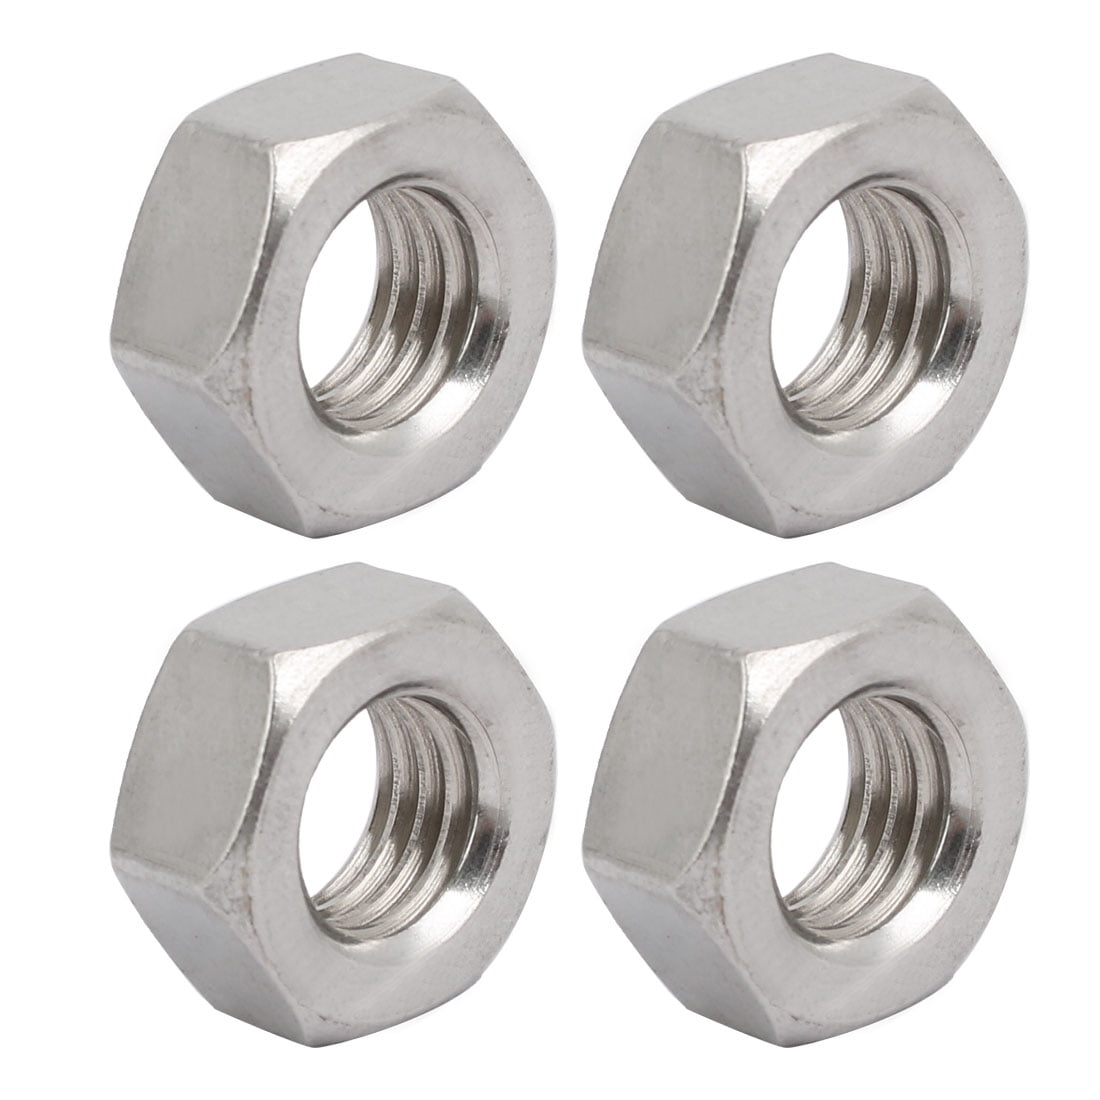 2pcs M20 x 1.5 mm Pitch Stainless Steel Left Hand Thread Hex Nut Metric 